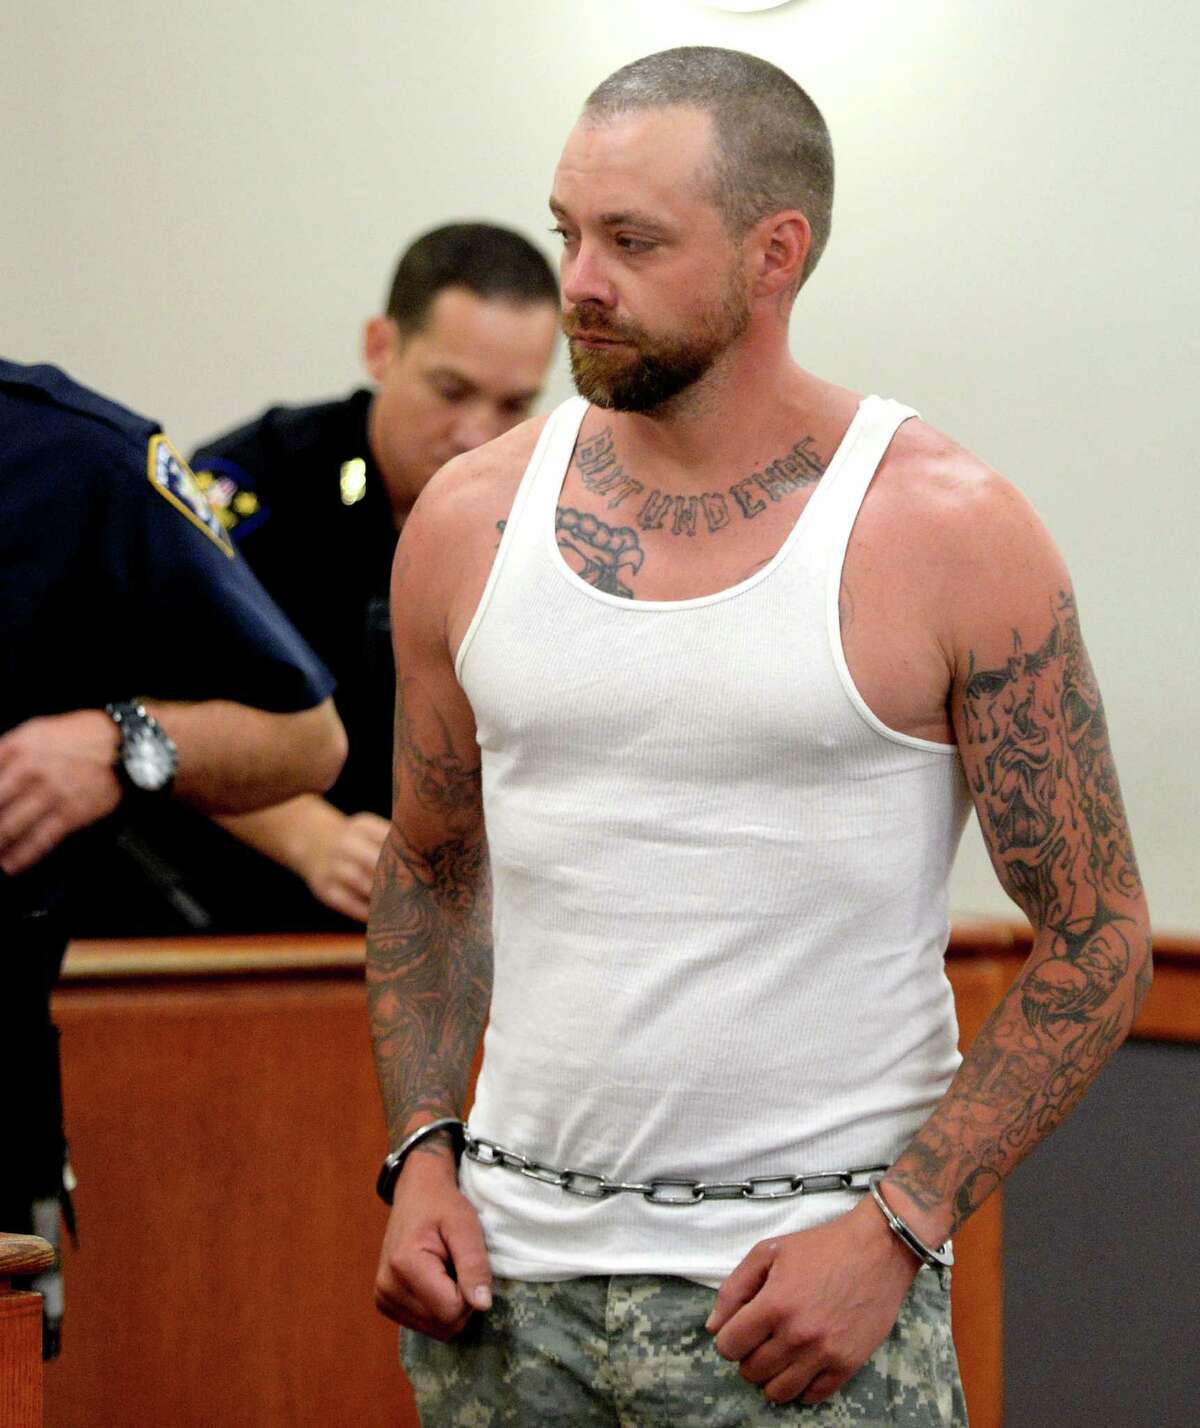 Daniel Reuter, 33, is arranged in Troy City Court on Sep. 2, 2014, in Troy, N.Y. (Skip Dickstein/Times Union archive)